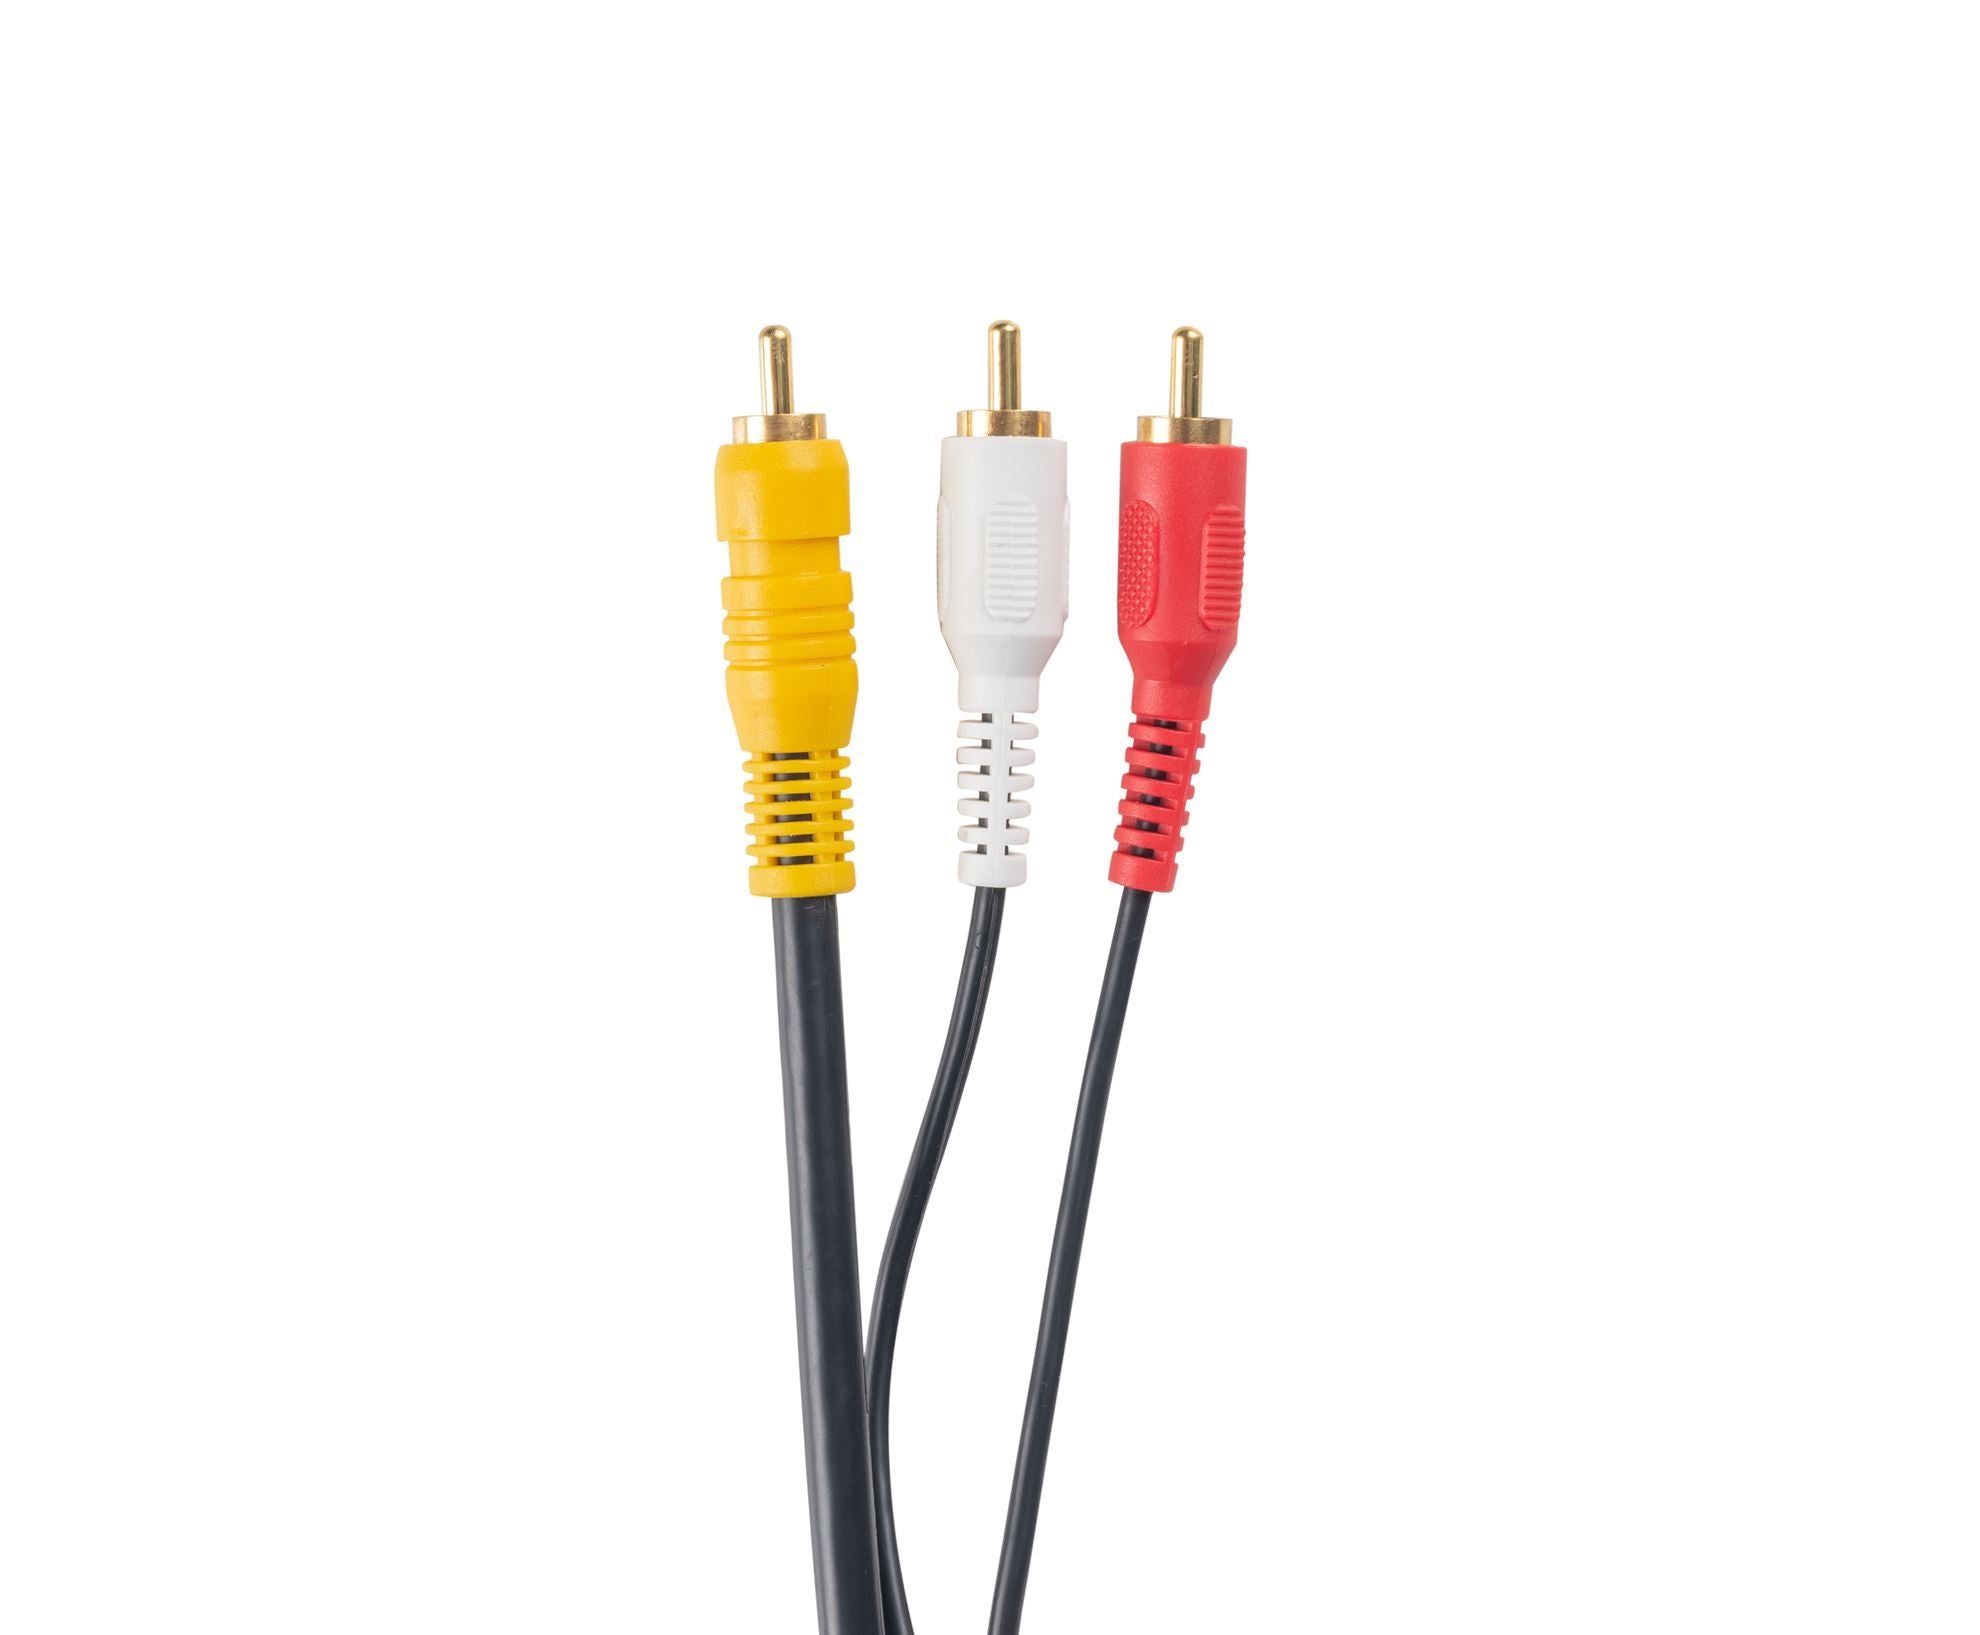 DYNAMIX_10m_RCA_Audio_Video_Cable,_3_to_3_RCA_Plugs._Yellow_RG59_Video,_standard_Red_&_White_audio_with_gold_plated_connectors. 409